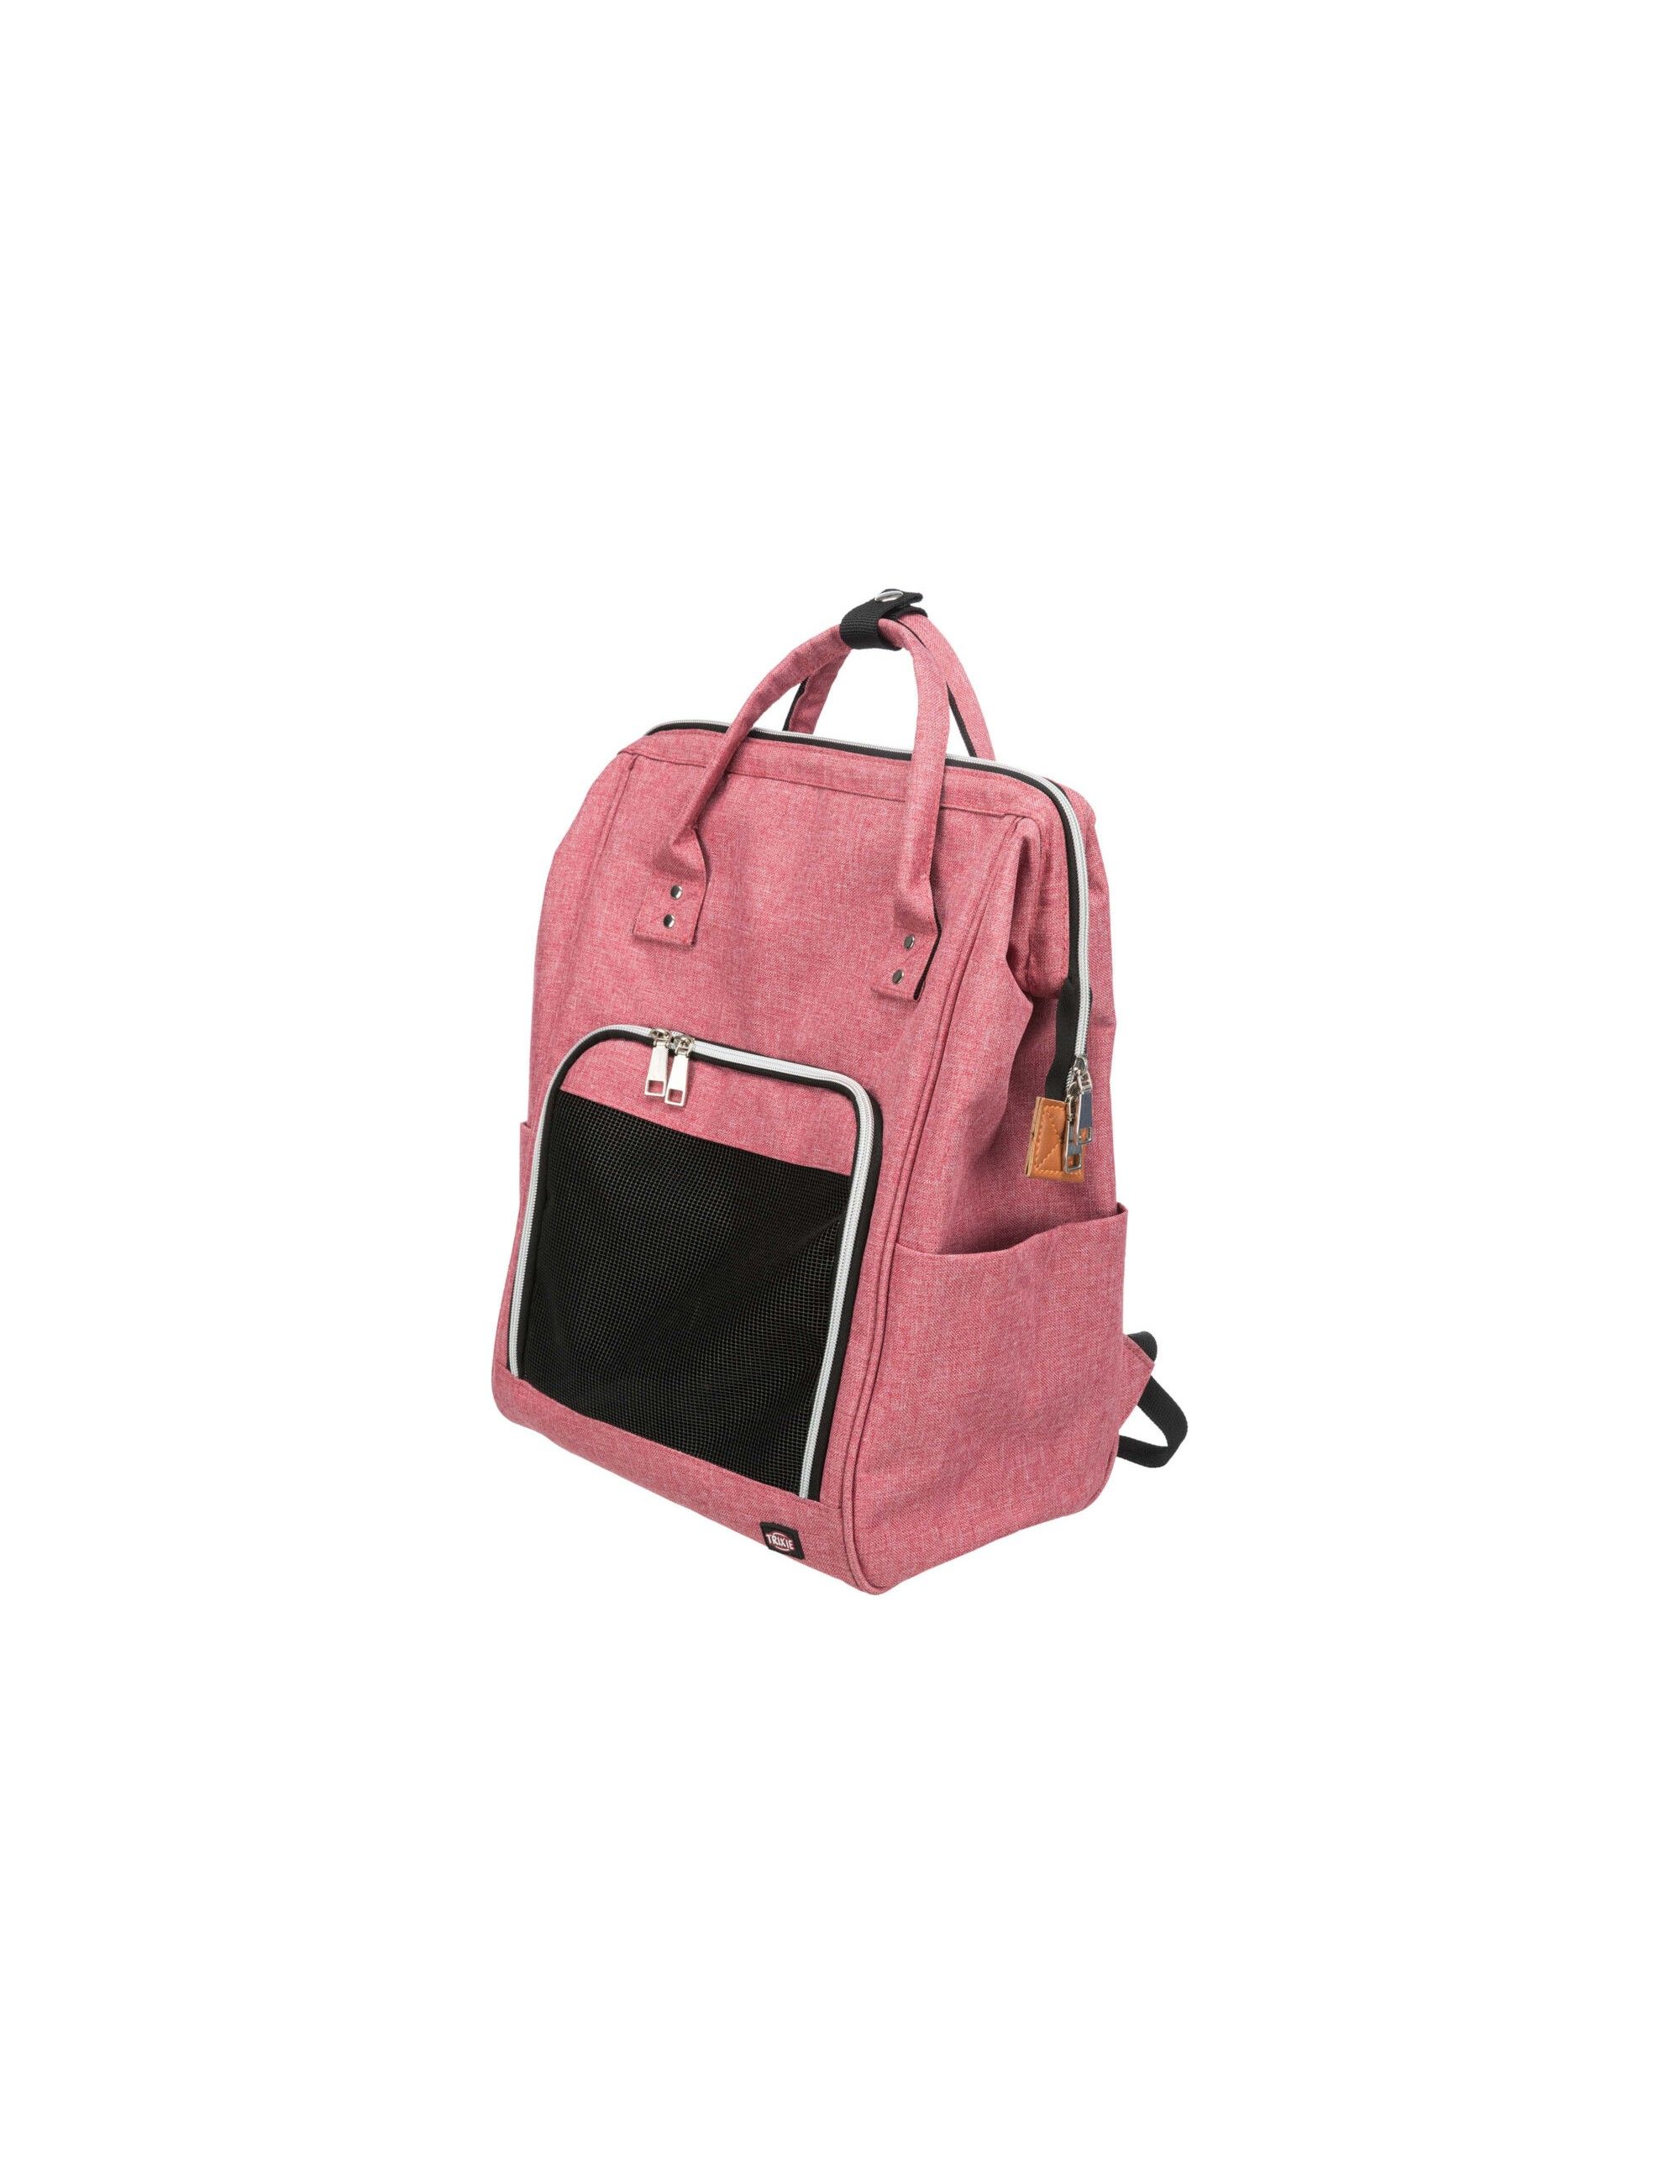 TRIXIE - Red “Ava” Transport Backpack